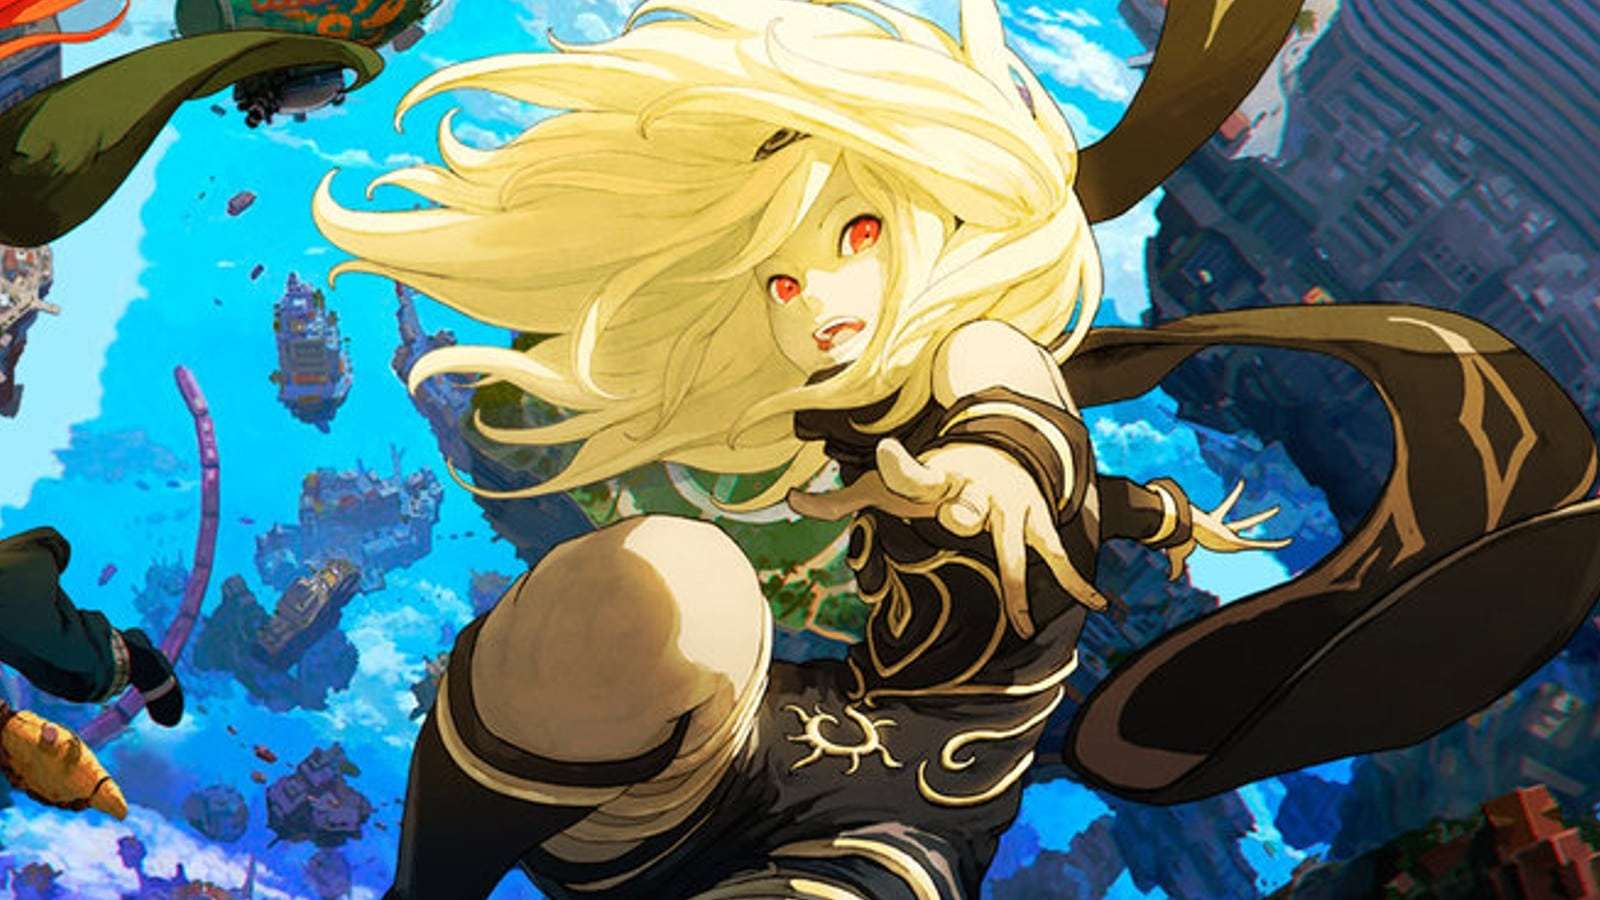 A still from Gravity Rush 2